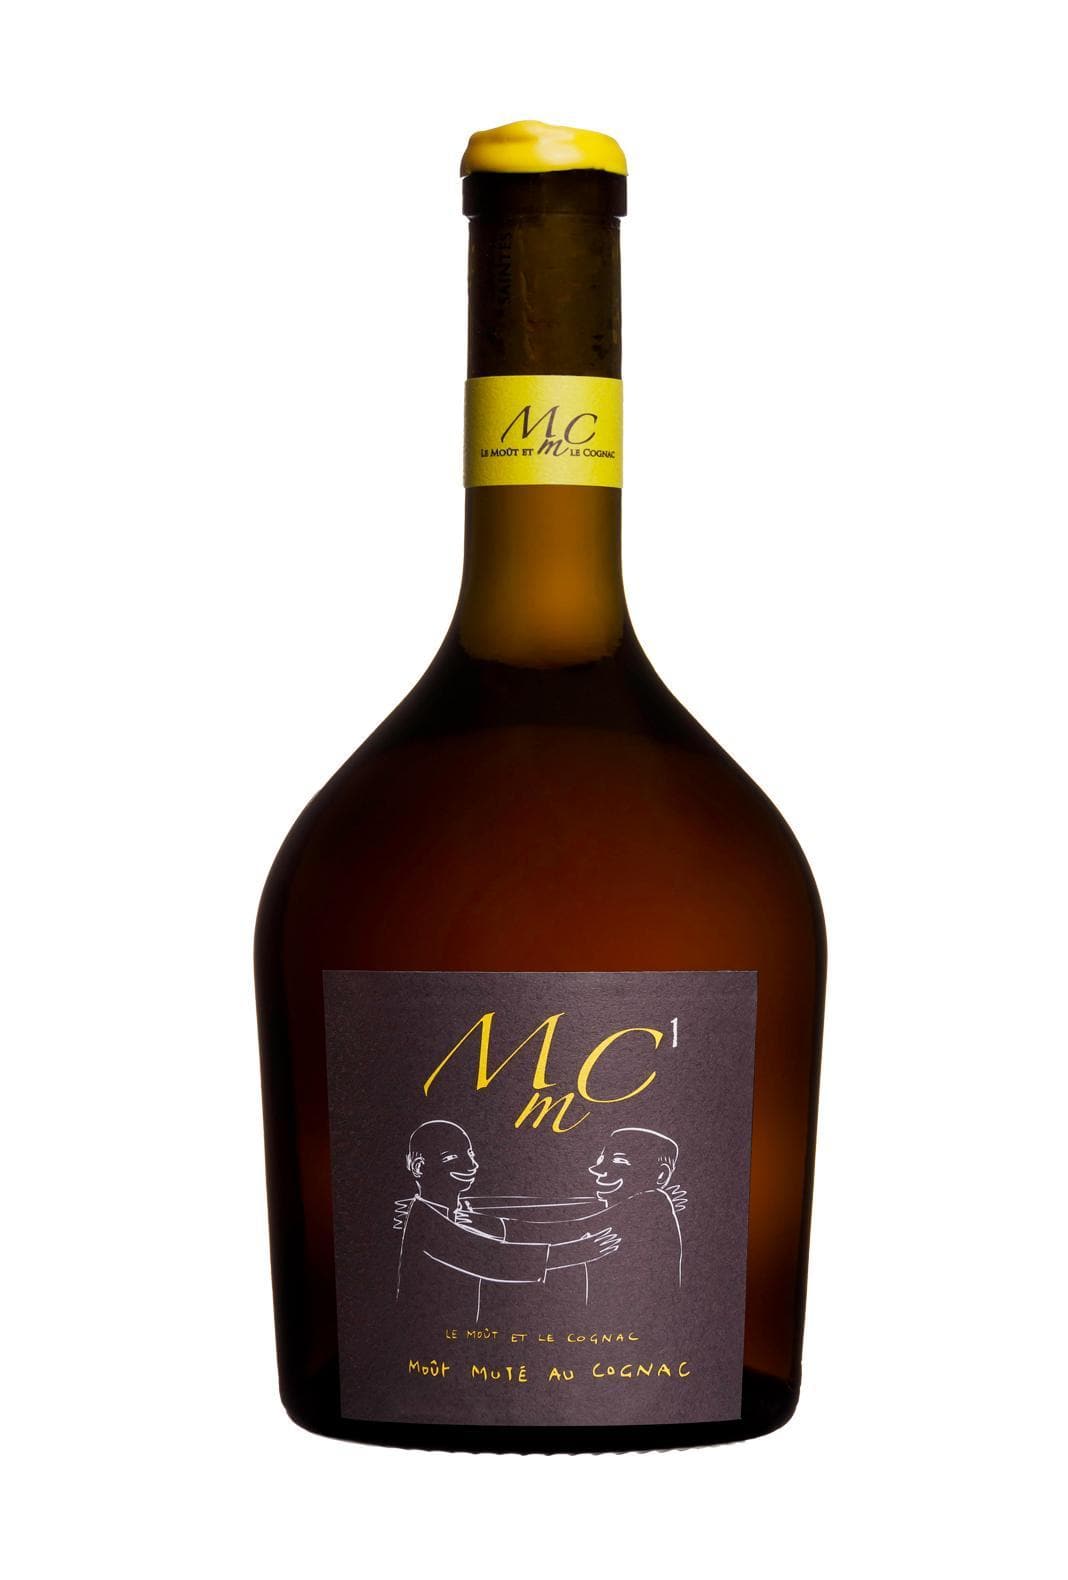 Grosperrin MMC 1 Mistelle-type Pineau des Charentes 7 years 17% 750ml | Alcoholic Beverages | Shop online at Spirits of France